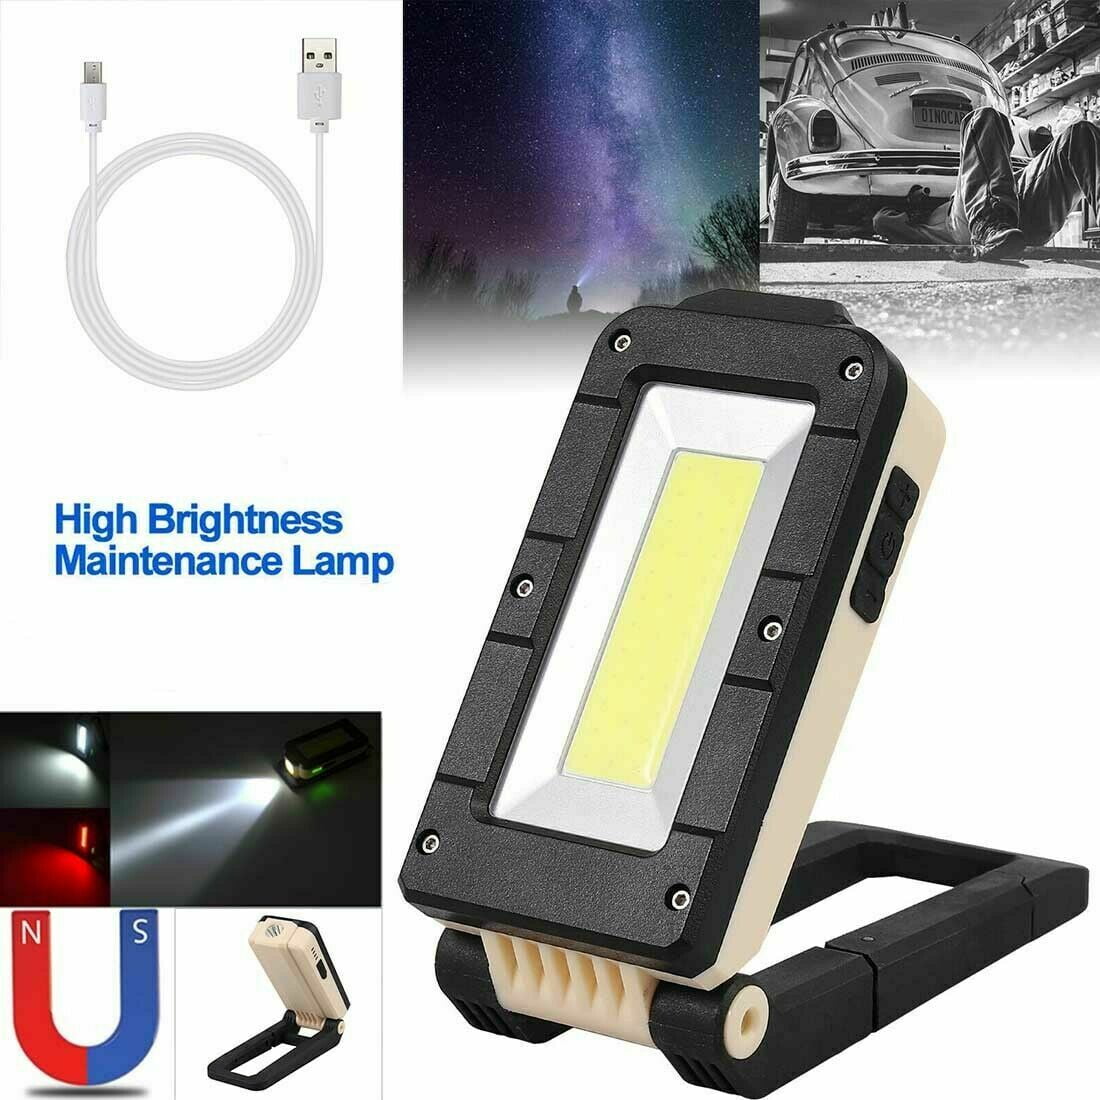 Led Work Light Portable Rechargeable Inspection Work Lamp with Super Bright COB LED Flashlight Magnetic Plate and Upright for Workshop Household Outdoor Camping Hiking Emergencies Use 